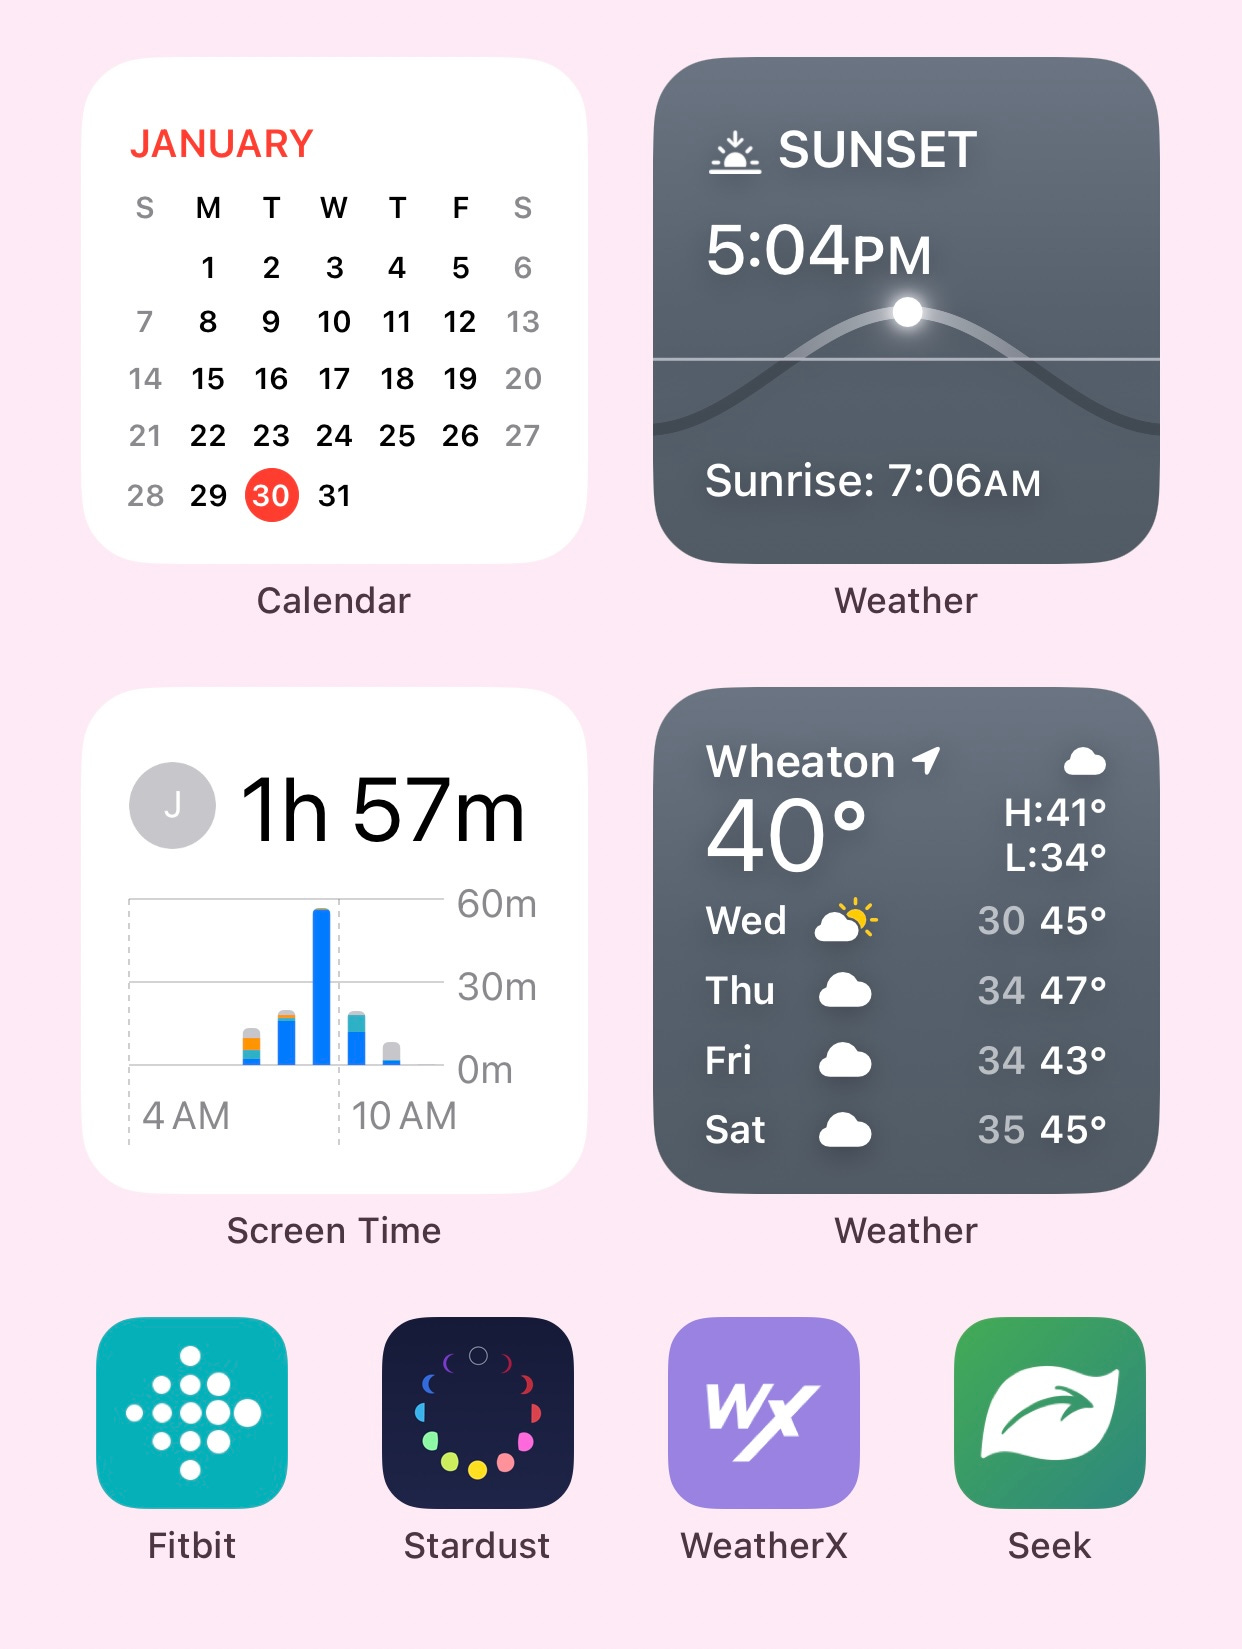 A screen capture of my iphone home screen. The background is light pink and the screen shows the widgets and apps described in the newsletter text below.